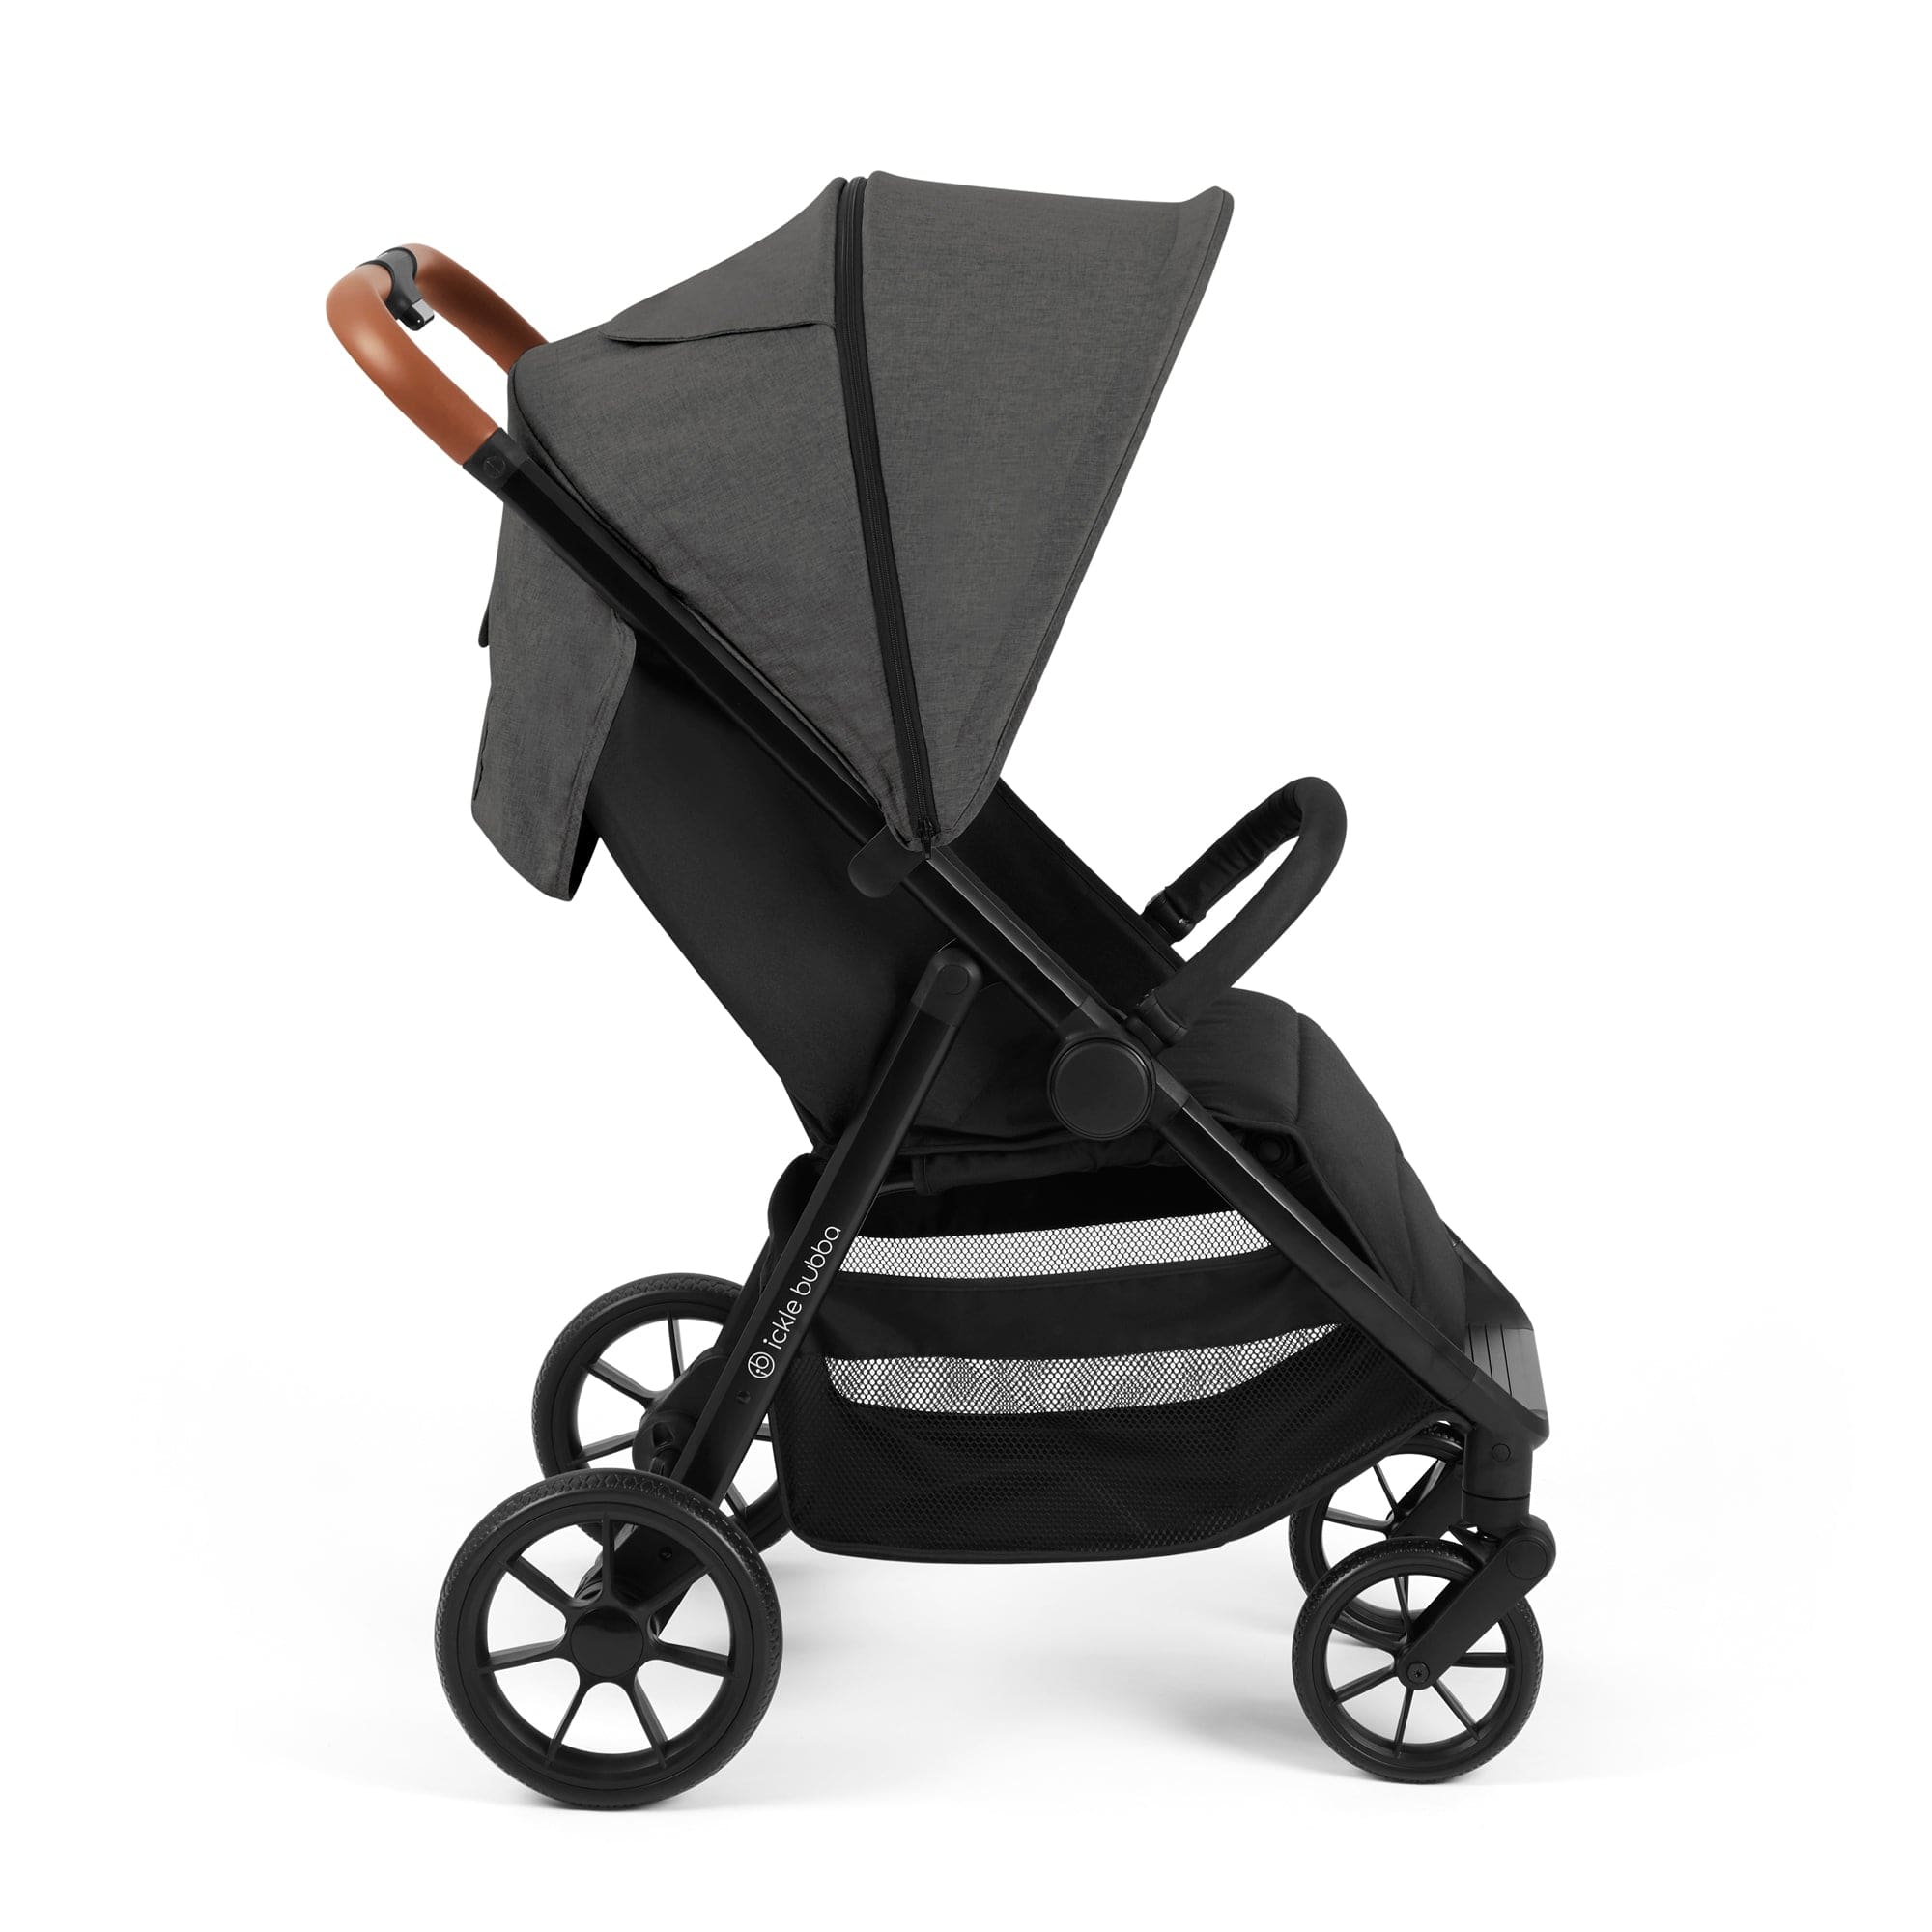 Ickle Bubba Pushchairs & Buggies STOMP STRIDE Pushchair in (Charcoal Grey) 15-006-100-148